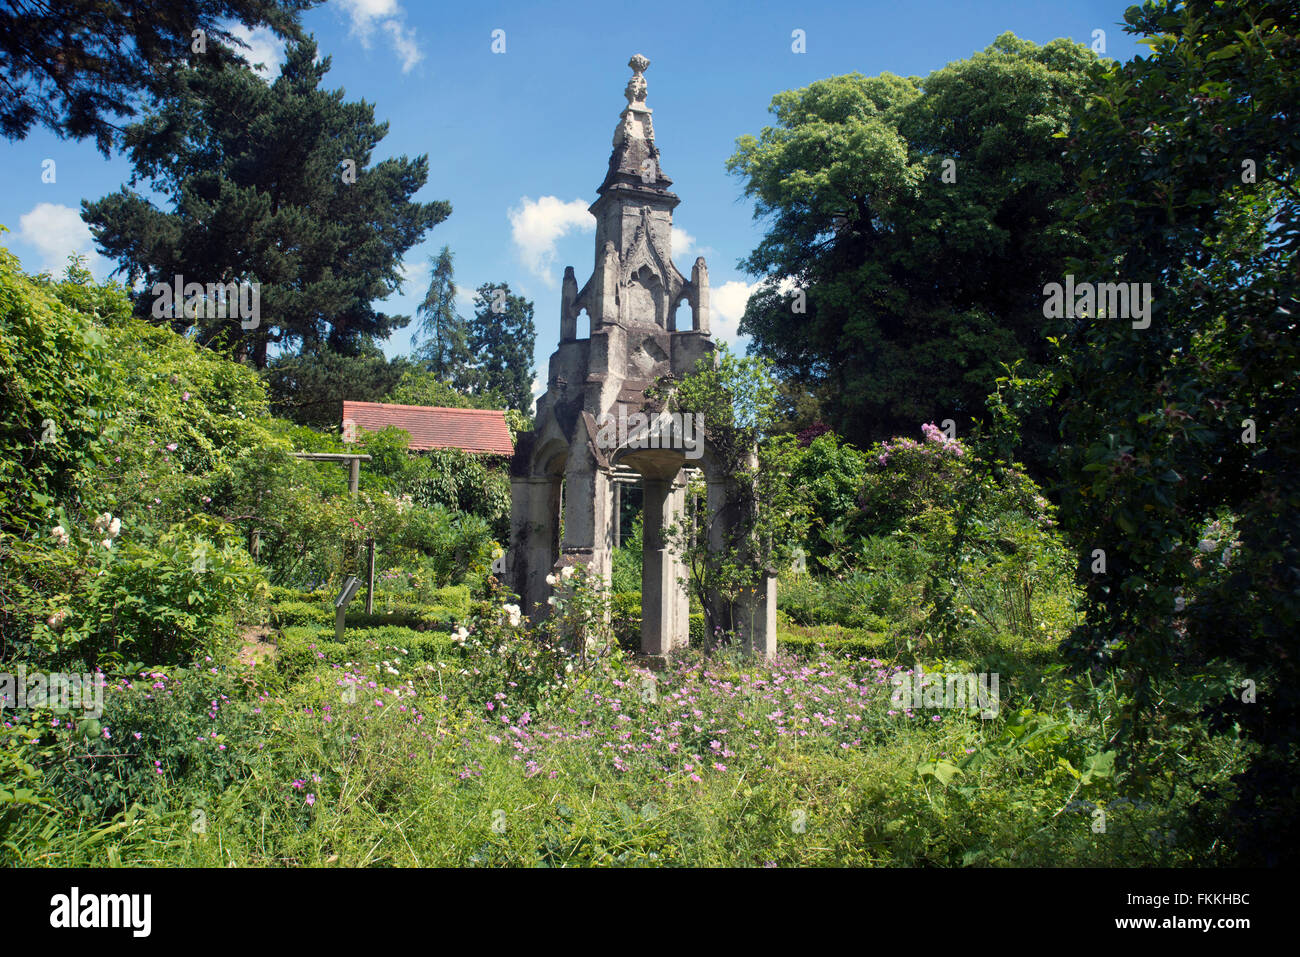 A view of the Myddelton House Gardens in Enfield, a summers day. Stock Photo